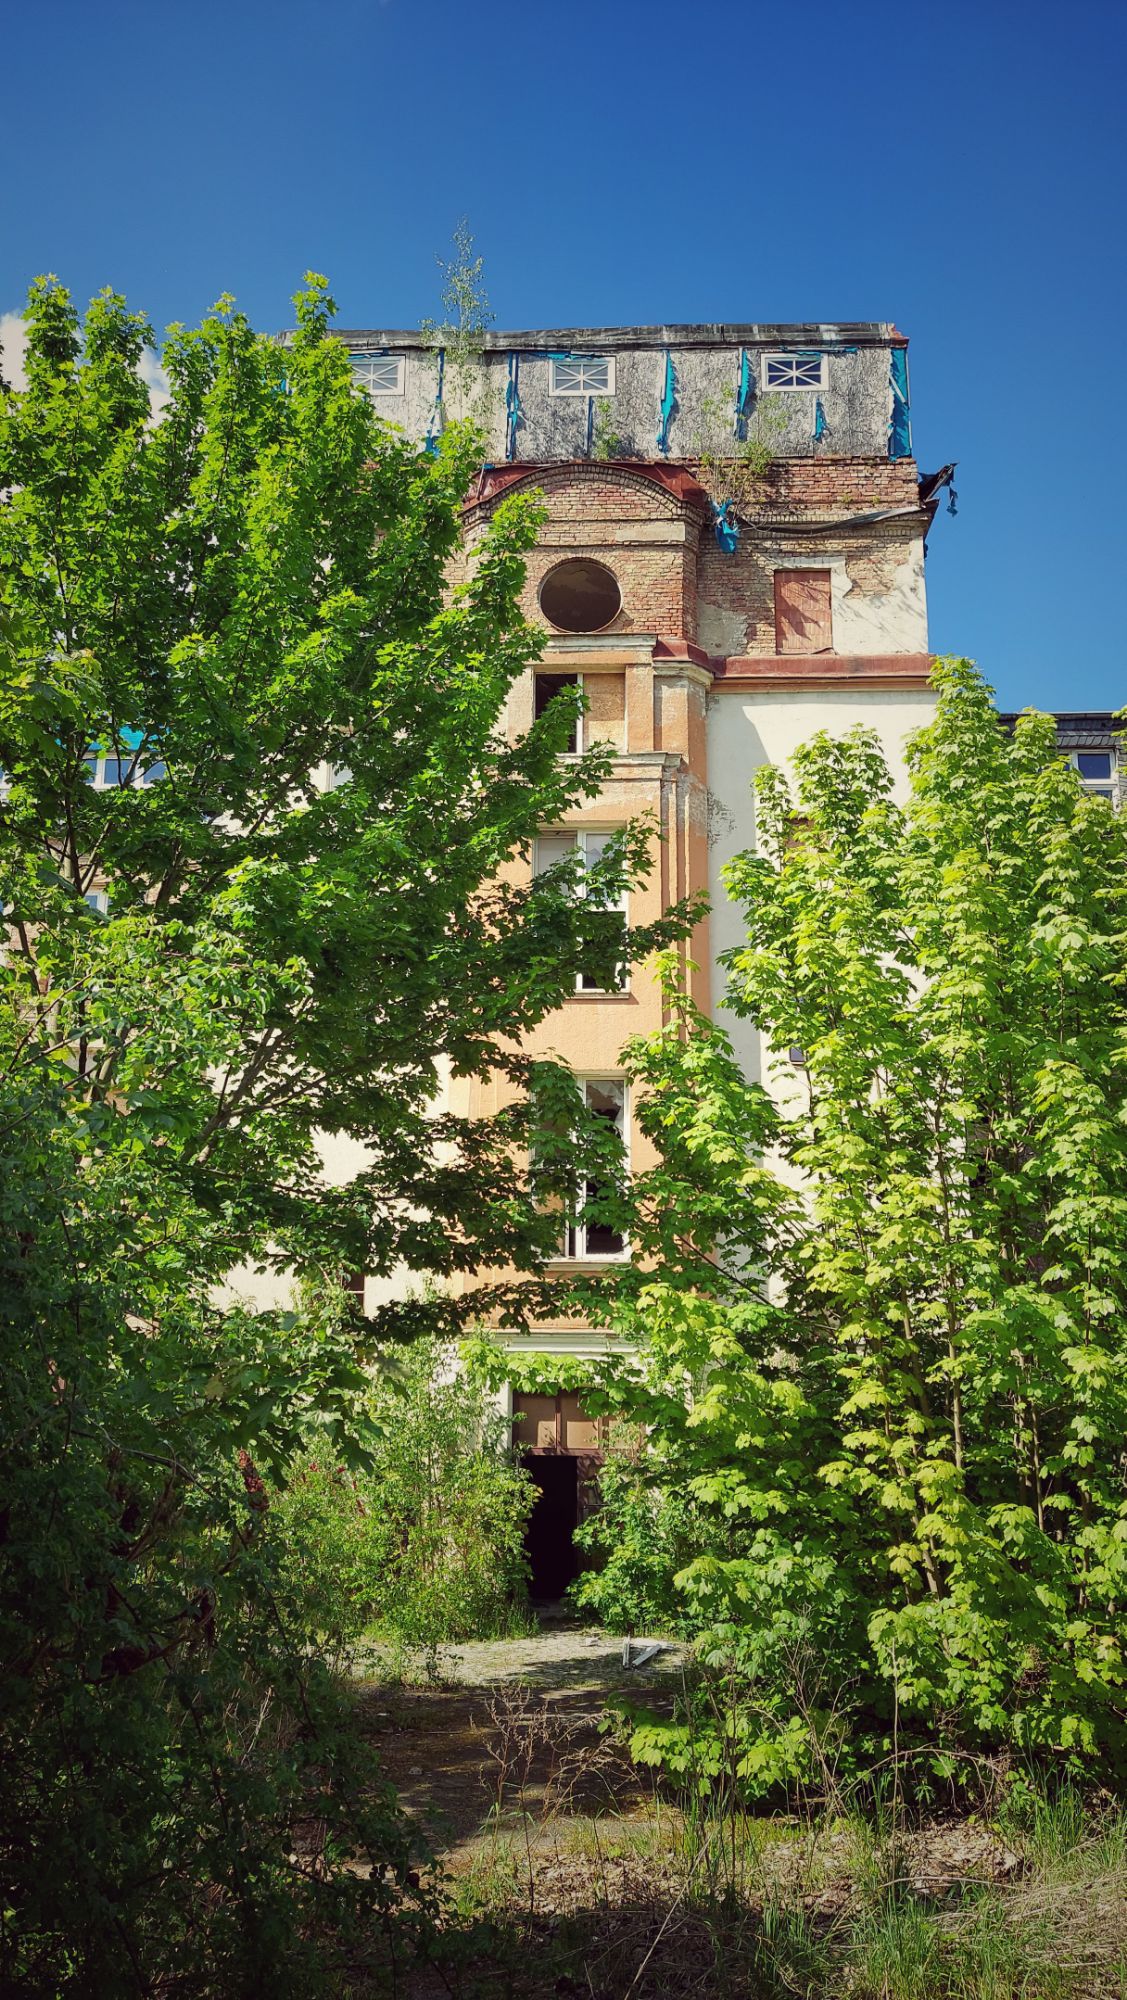 Old tower of a hospital, seen from inside bushes.